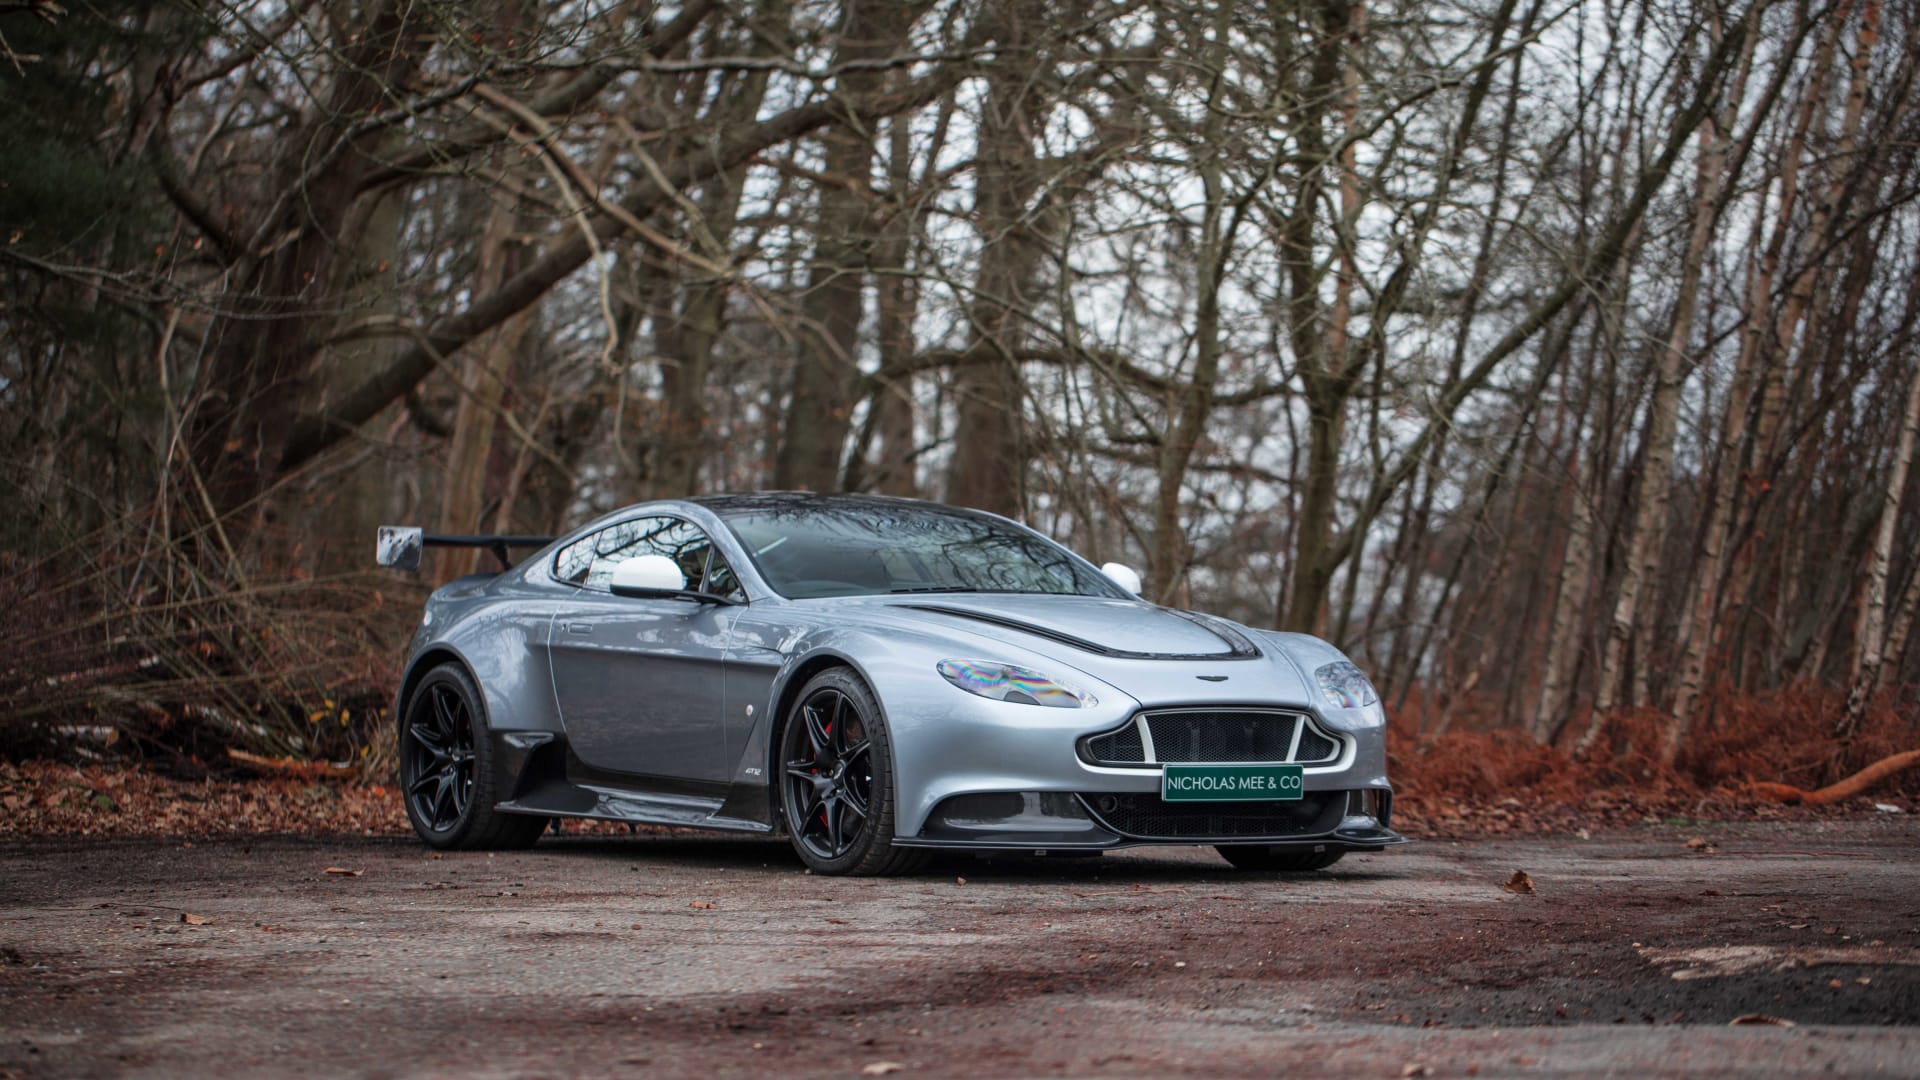 Servicing and Maintenance for Aston Martin Cars